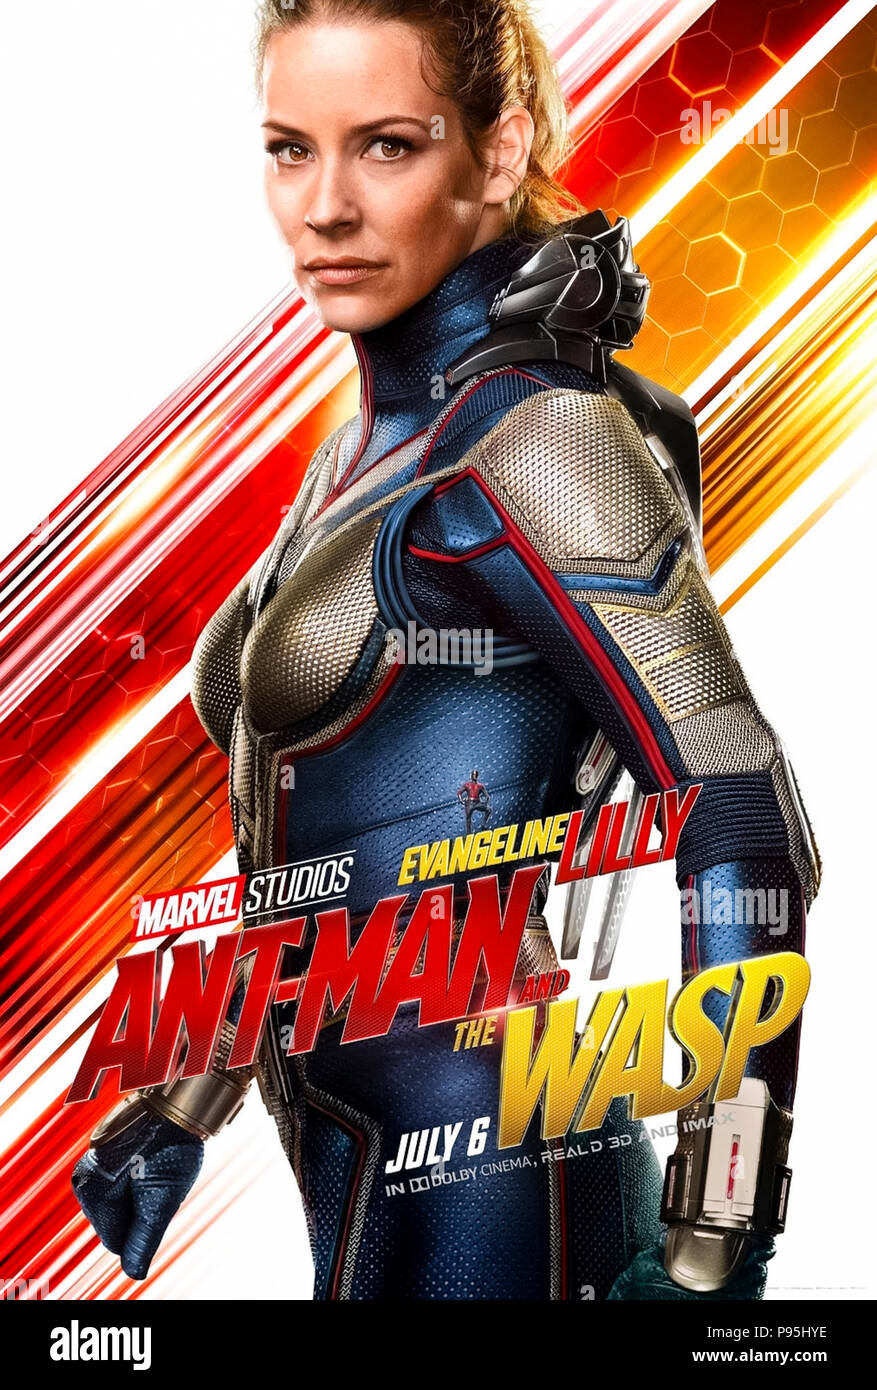 Ant-Man and The Wasp cast  Ant-man, Scott lang, Marvel movies